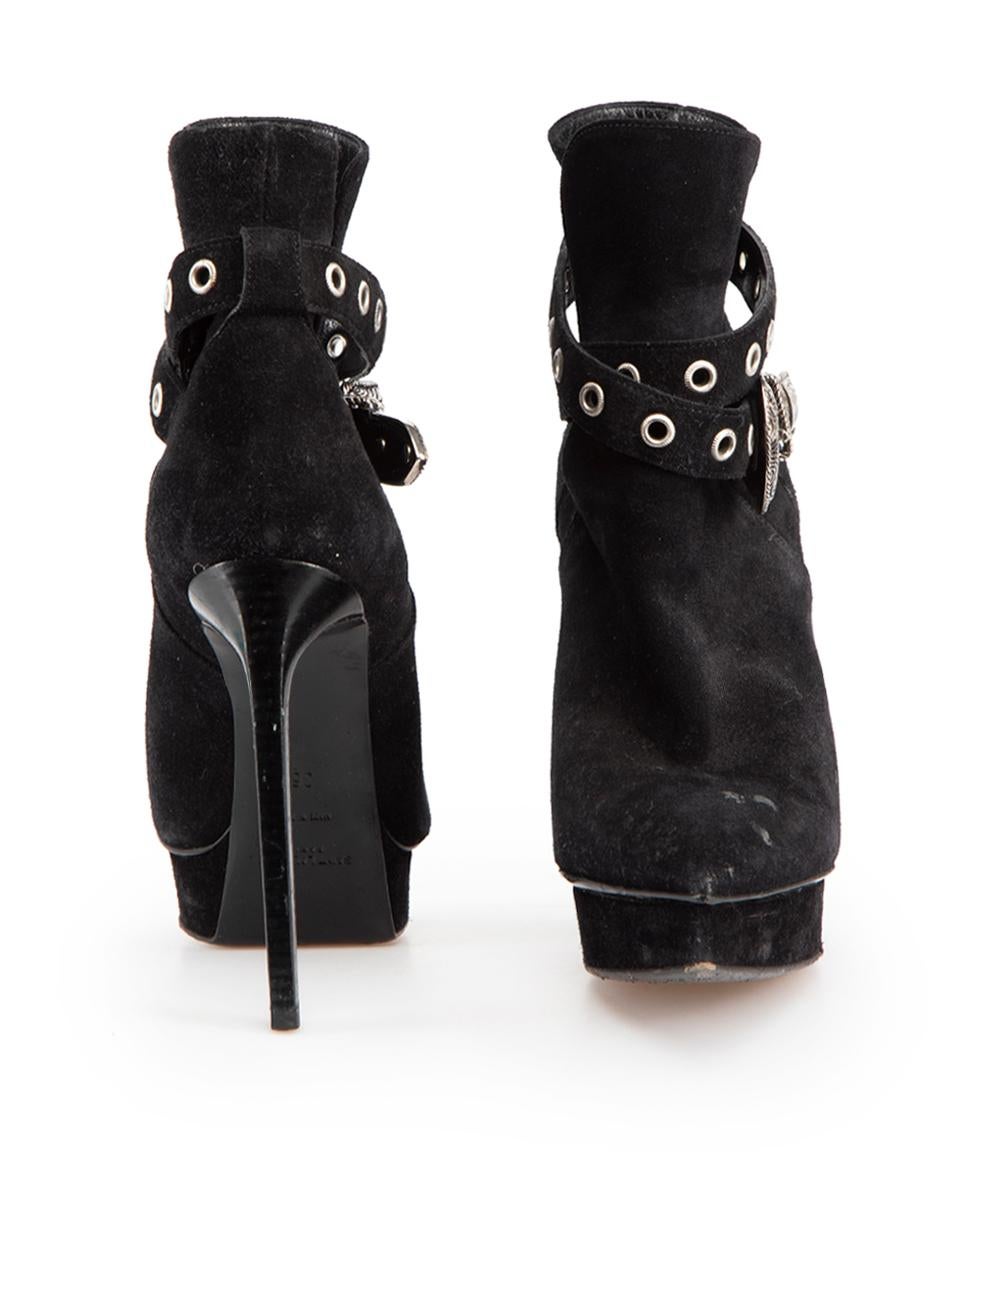 Saint Laurent Black Suede Buckle Heeled Boots Size IT 36 In Good Condition For Sale In London, GB